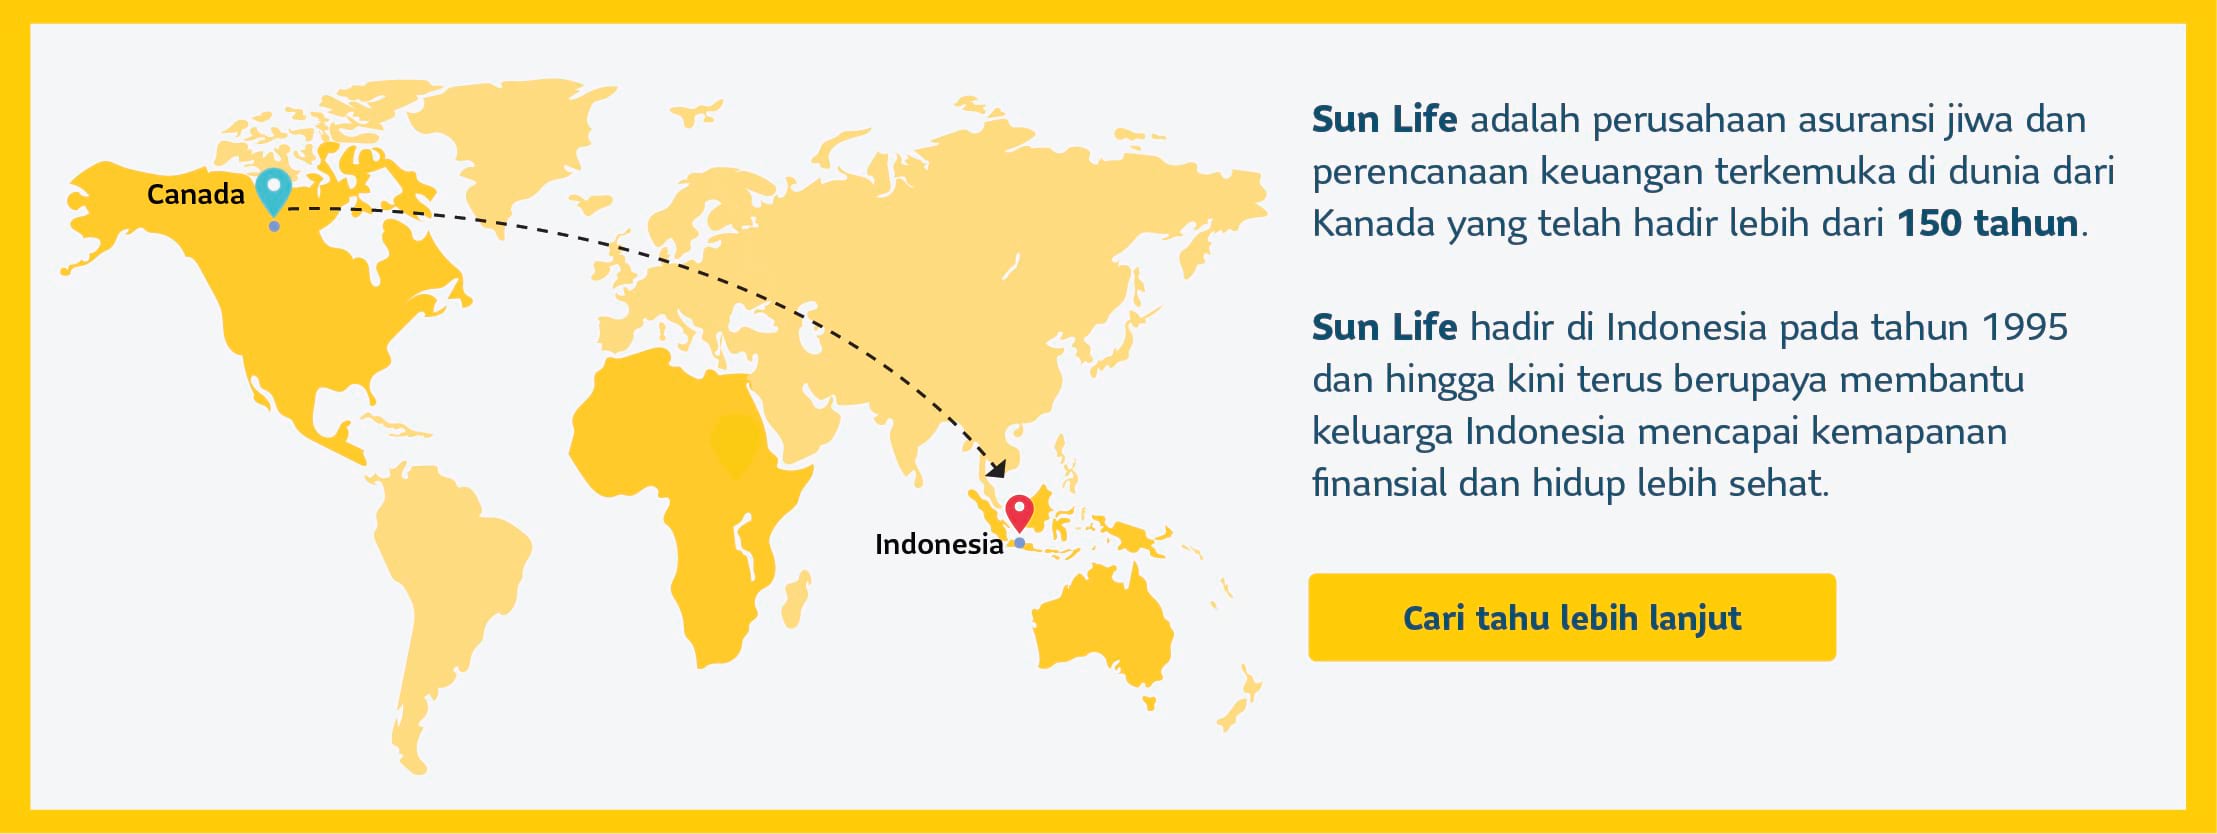 Secure Your Tomorrow Today with Sunlife